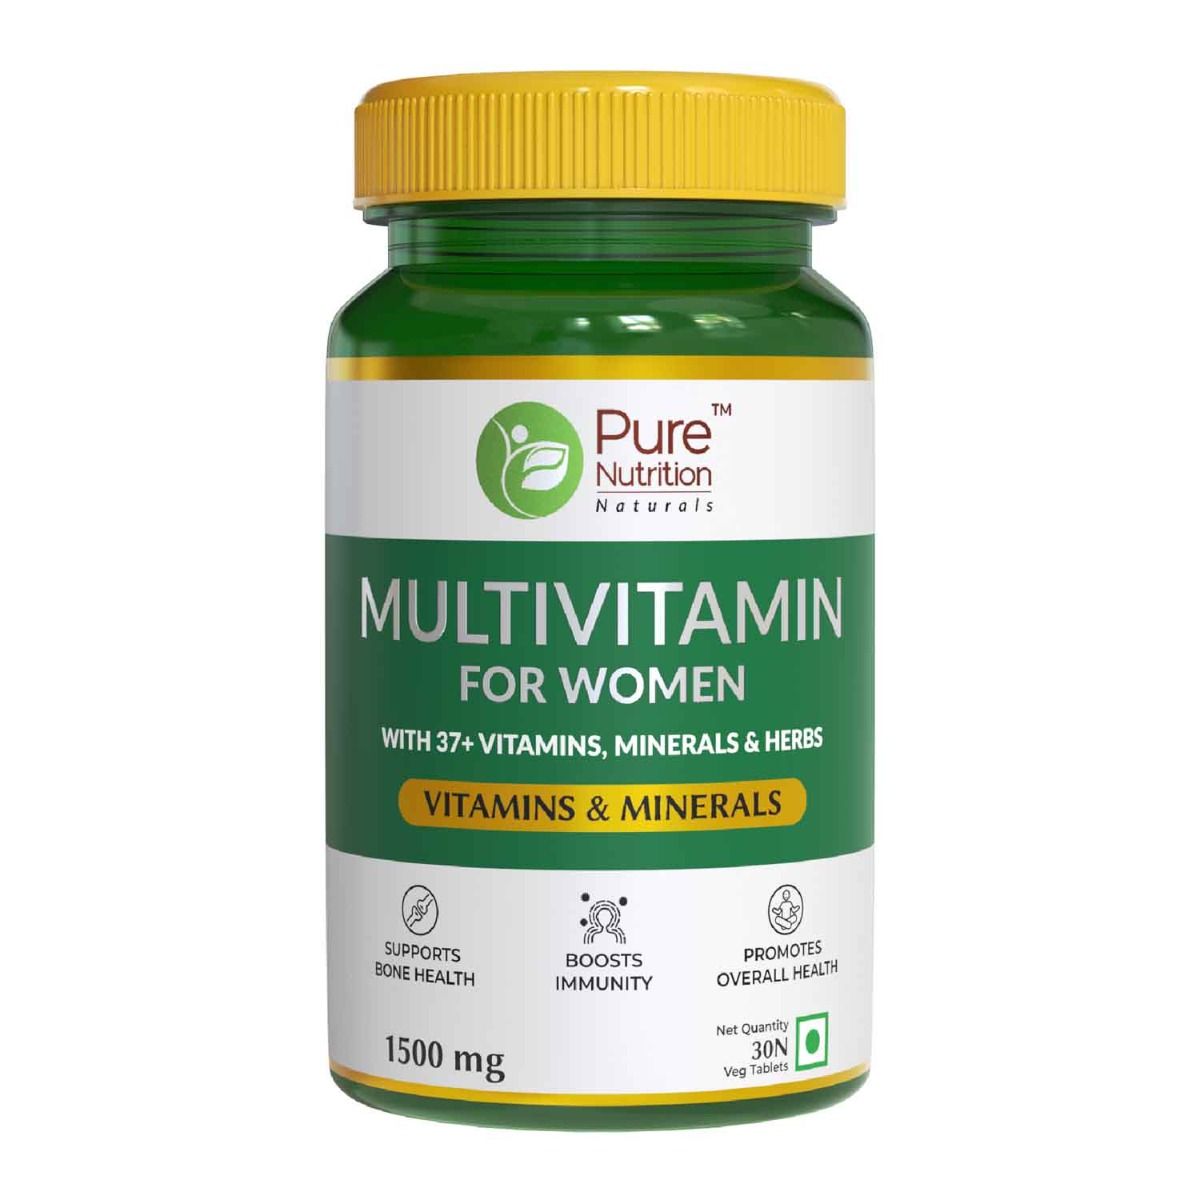 Buy Pure Nutrition Multivitamin 1500 mg for Women, 30 Tablets Online